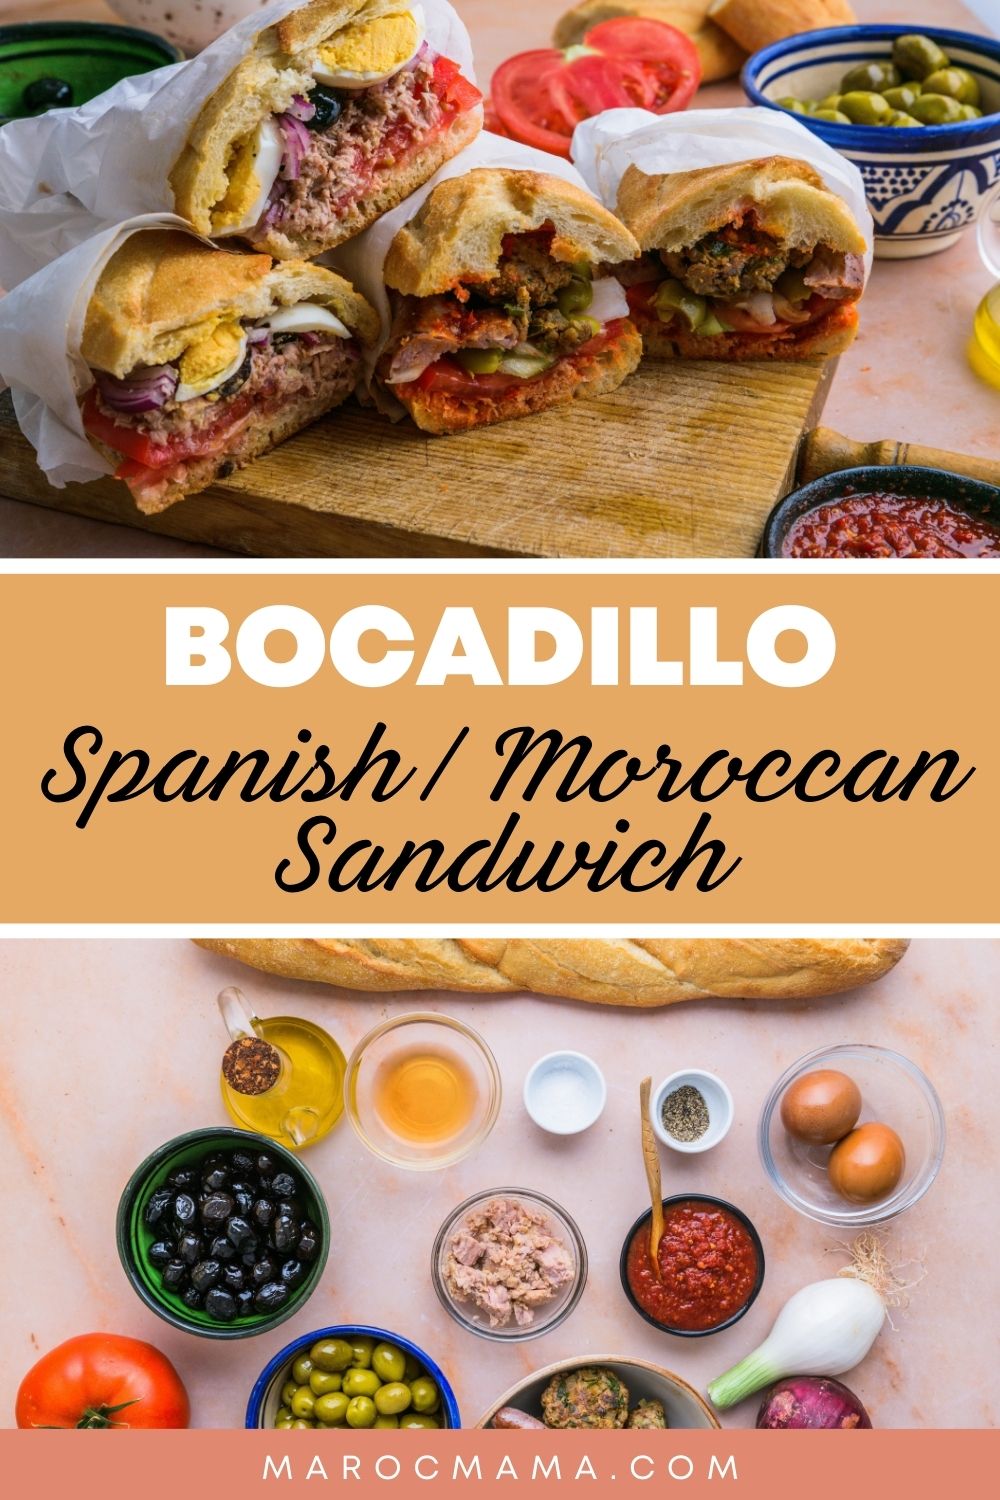 Top image is a close up shot of bocadillos and bottom image is the ingredients in making this dish